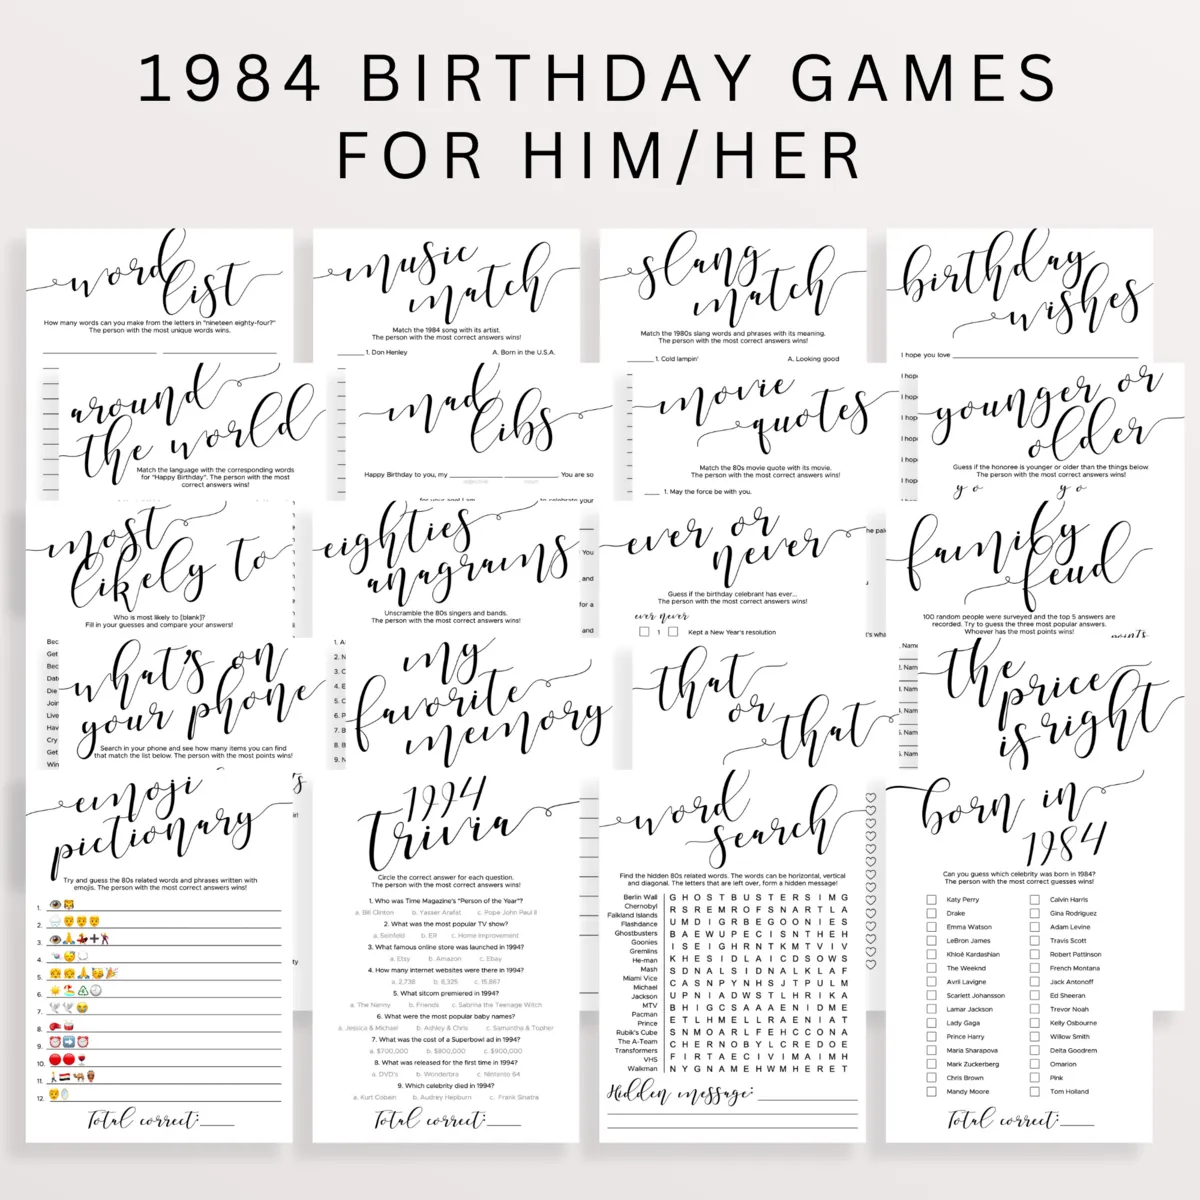 Born in 1984 Birthday Games Pack for Men and Women